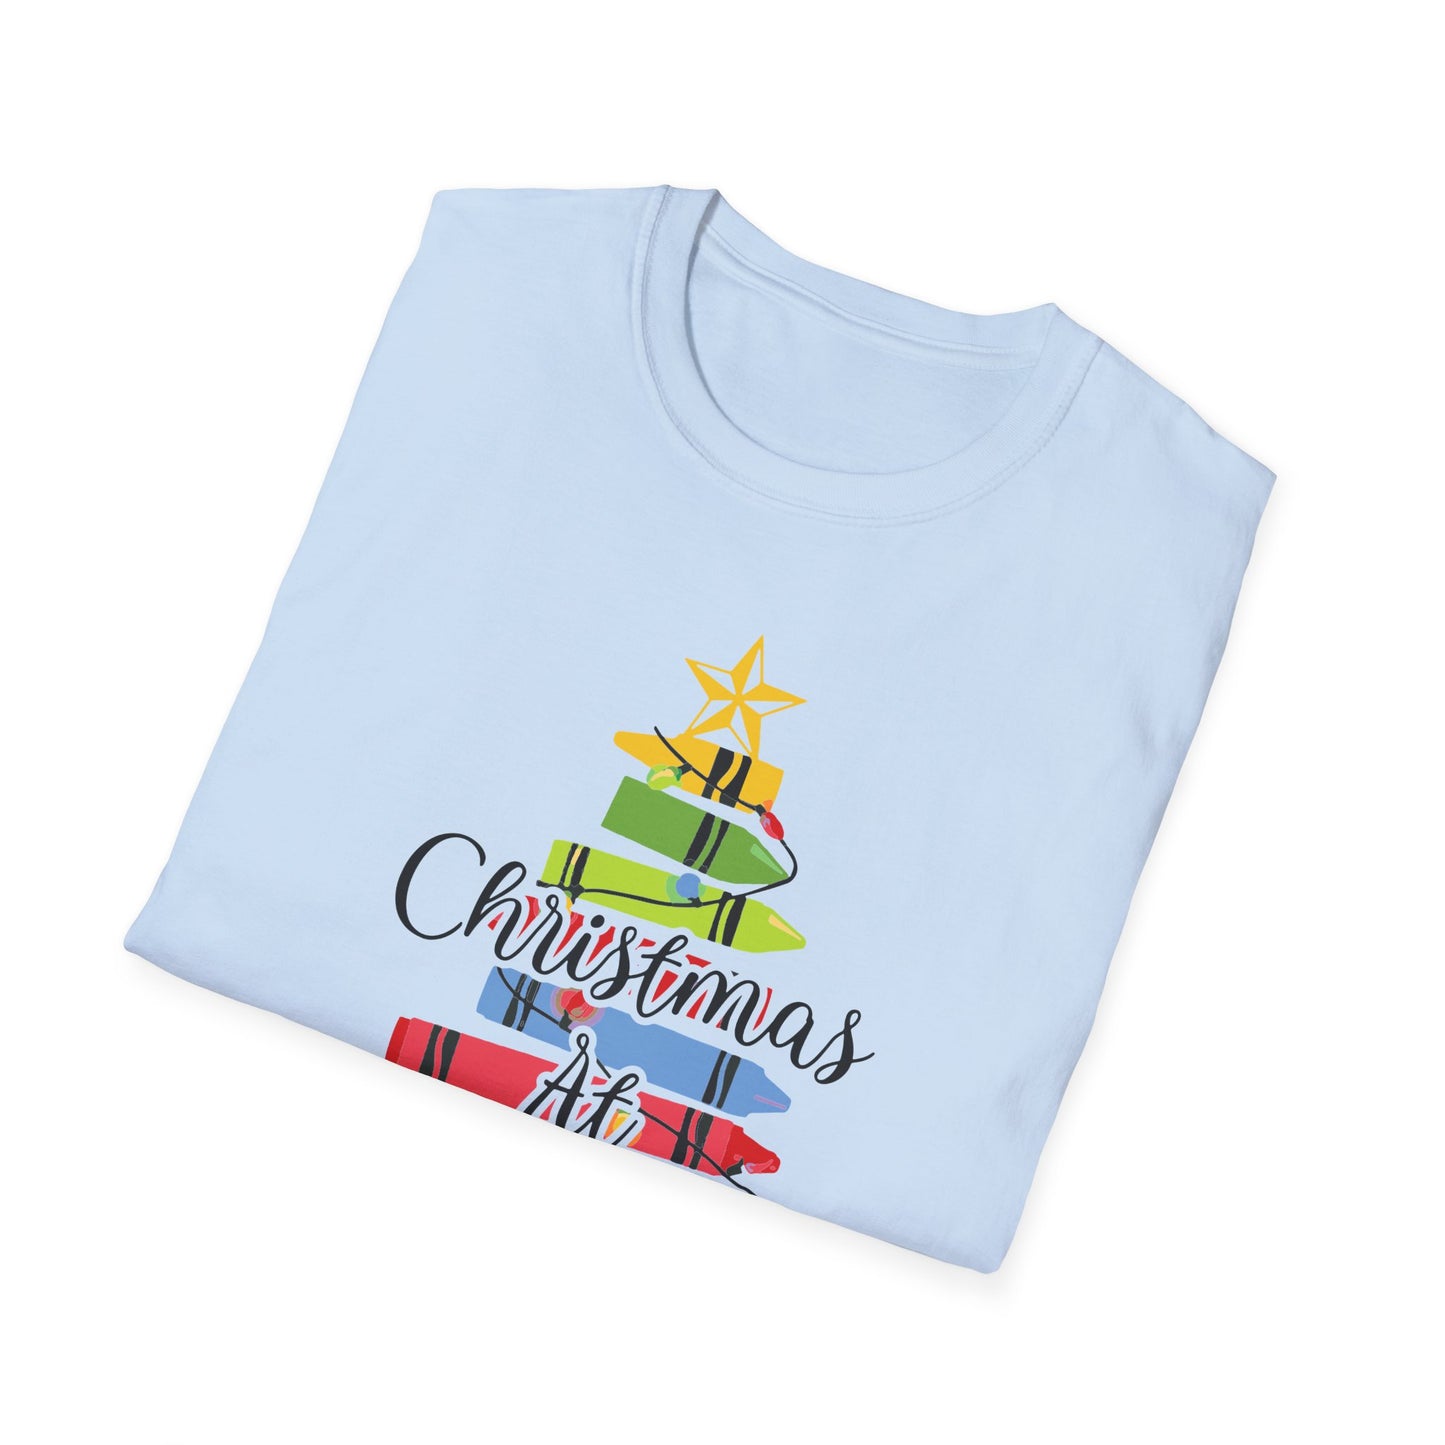 Christmas At Full Potential Unisex Softstyle T-Shirt